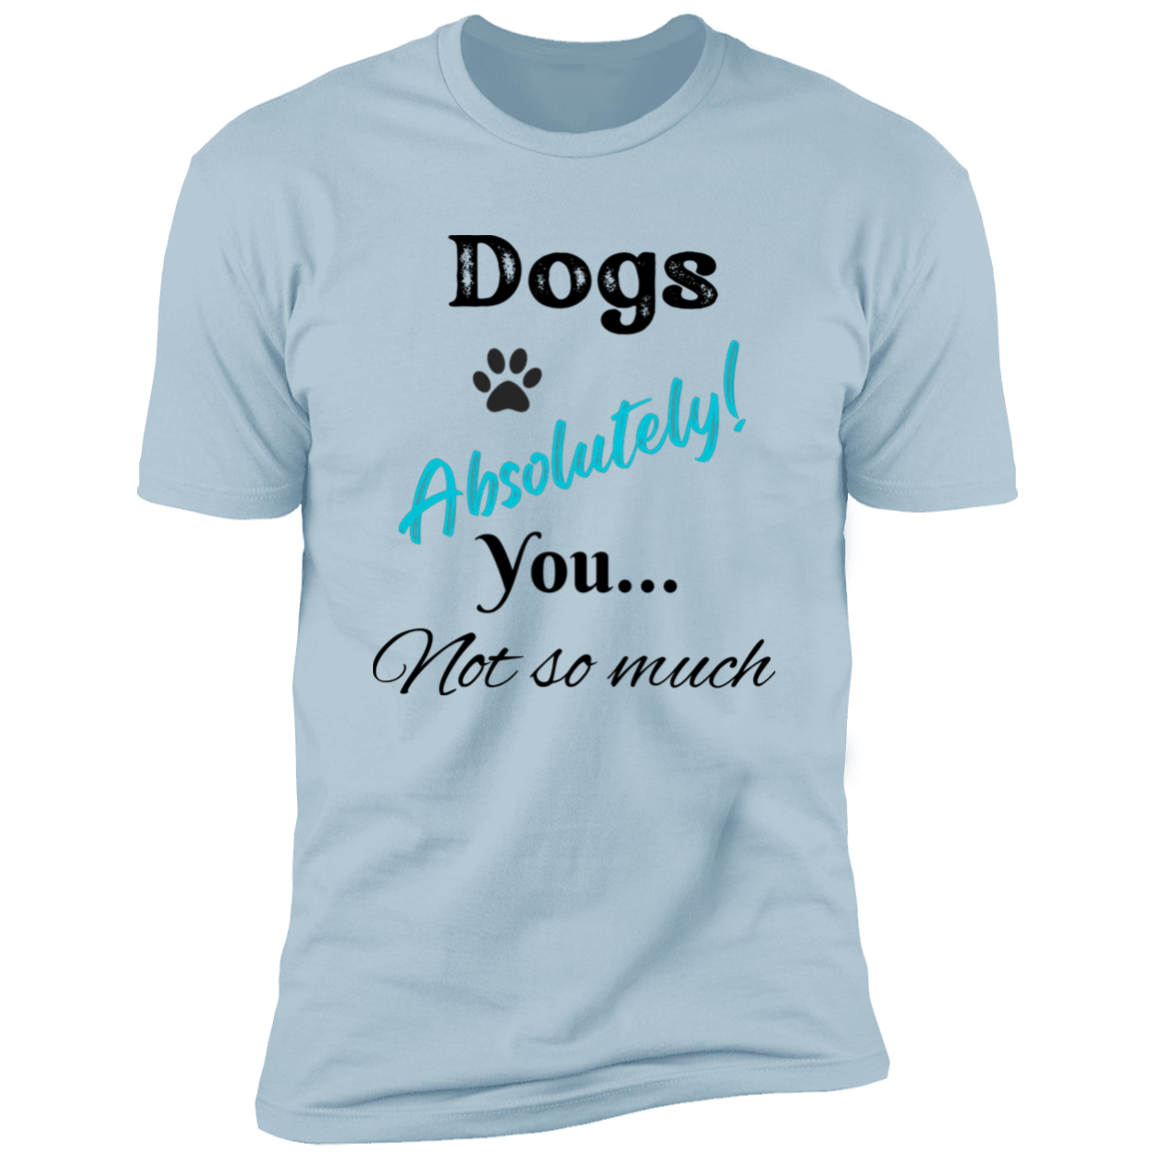 Dogs Absolutely! You Not So Much T-shirt, funny dog shirt dog shirt for humans, in light blue